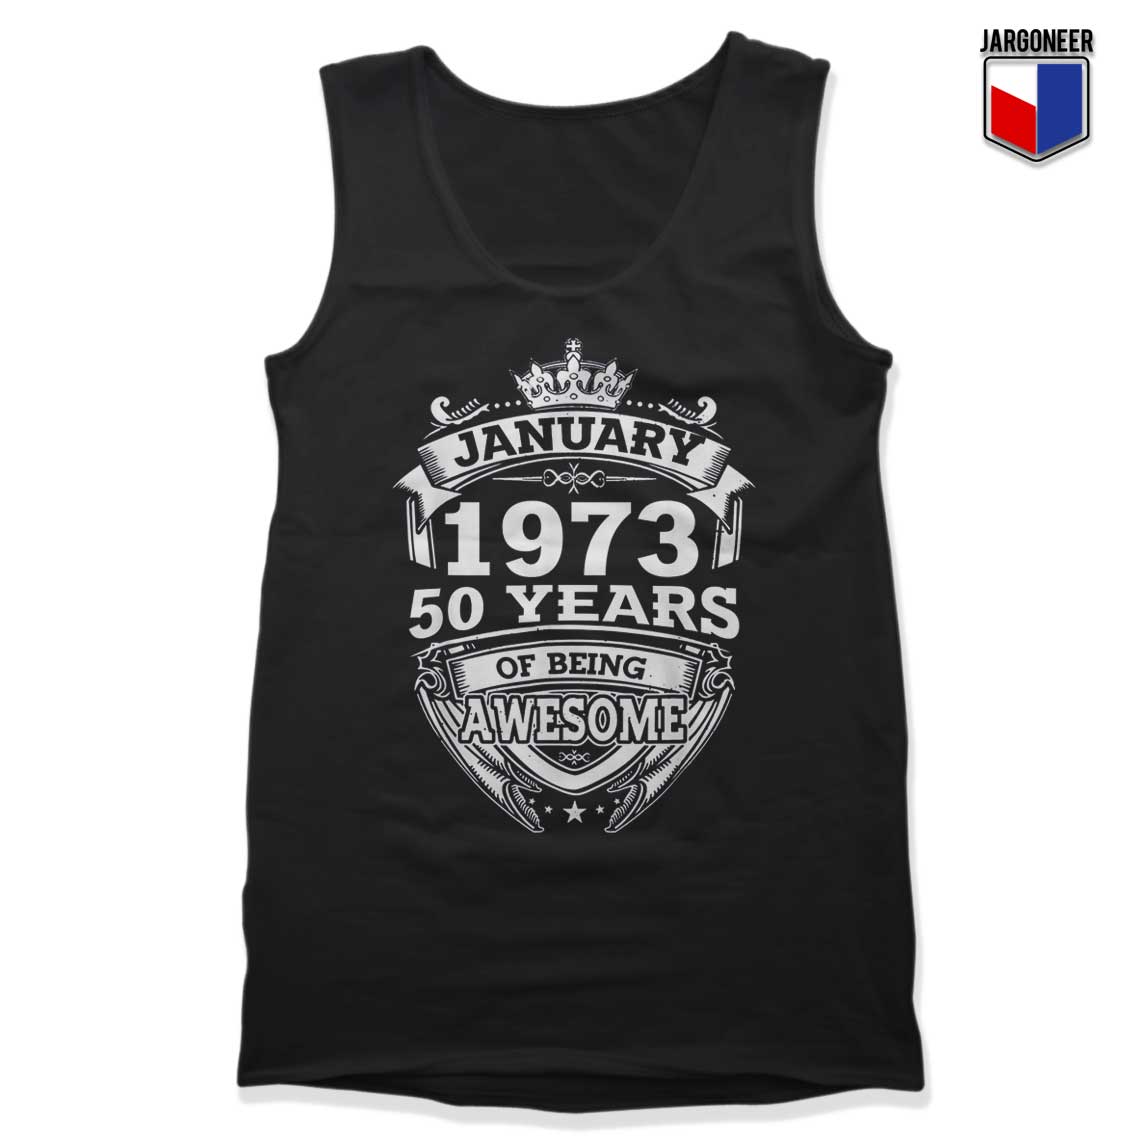 January 1973 50 Years Of Being Awesome Tank Top - Shop Unique Graphic Cool Shirt Designs